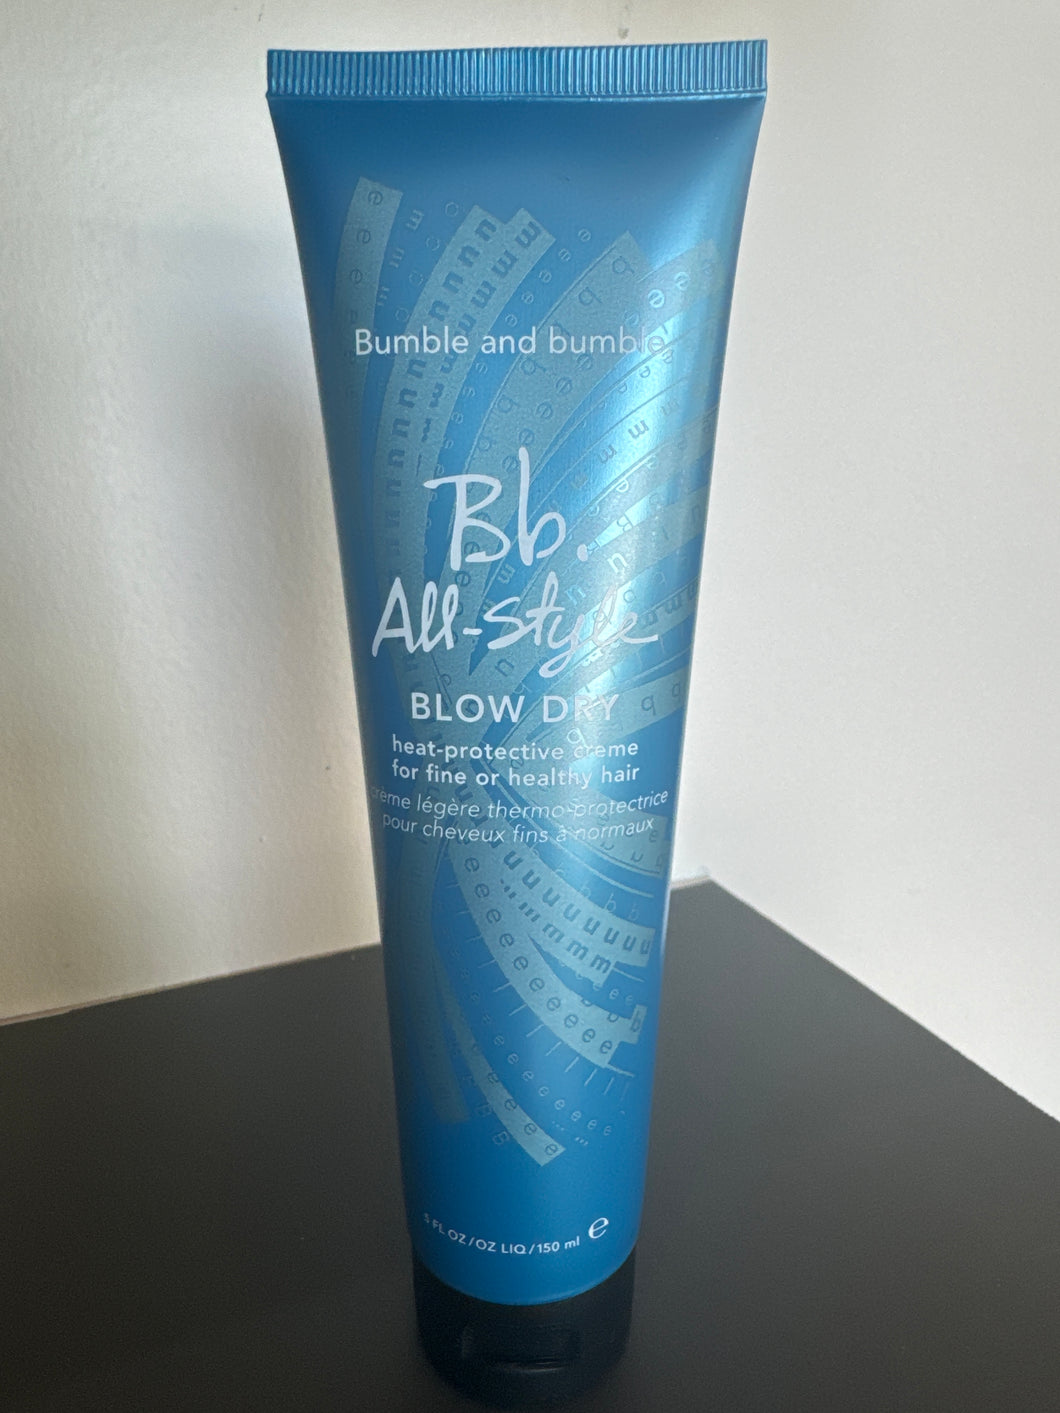 All-Style Blow Dry 5 oz